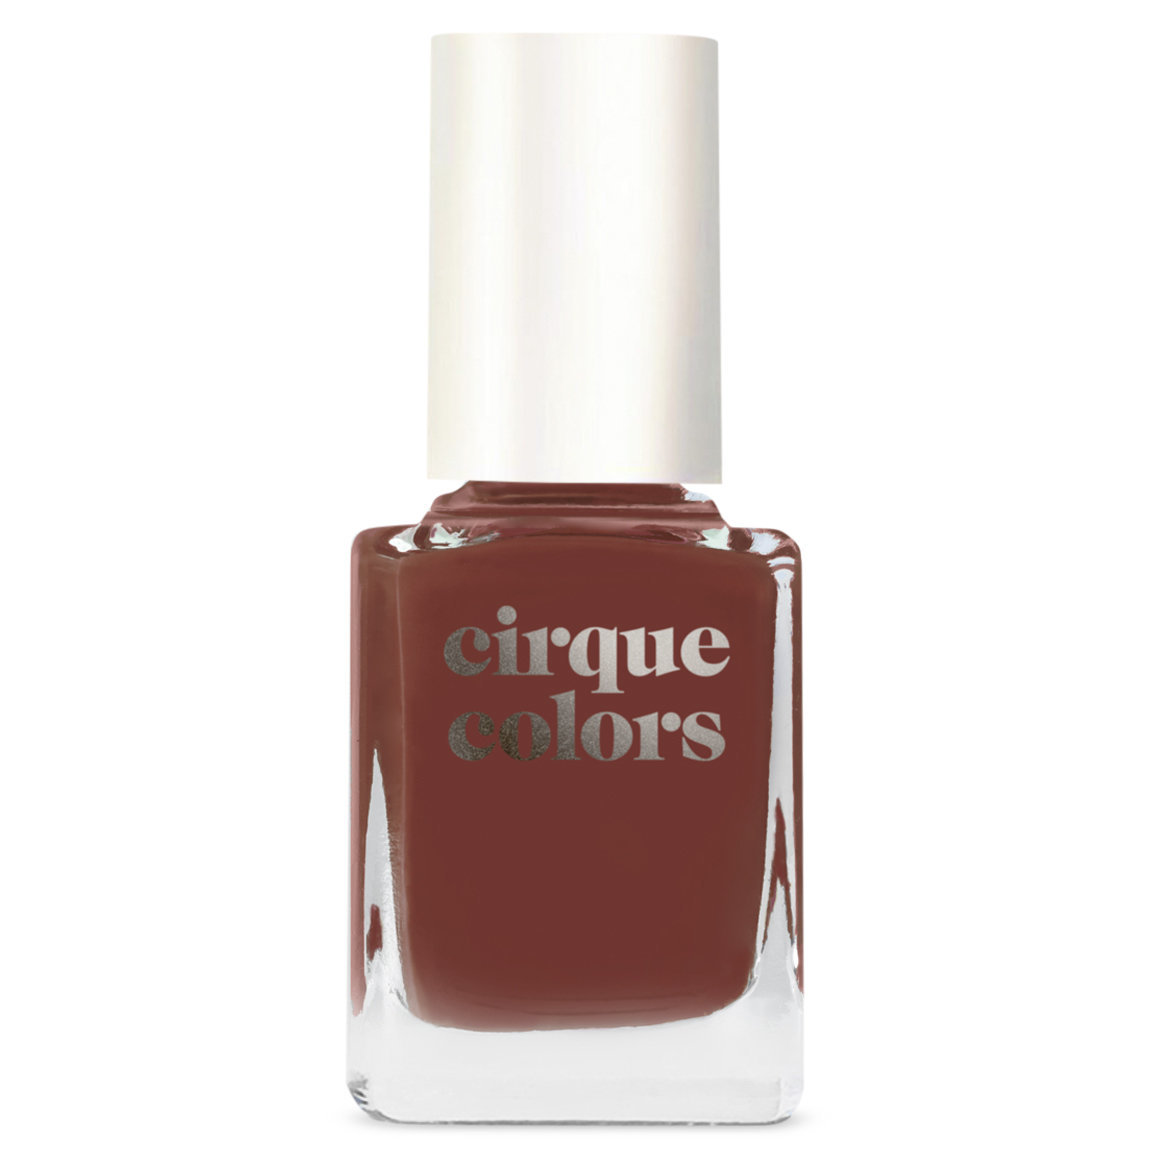 Cirque Colors Jelly Nail Polish Cocoa Jelly alternative view 1 - product swatch.